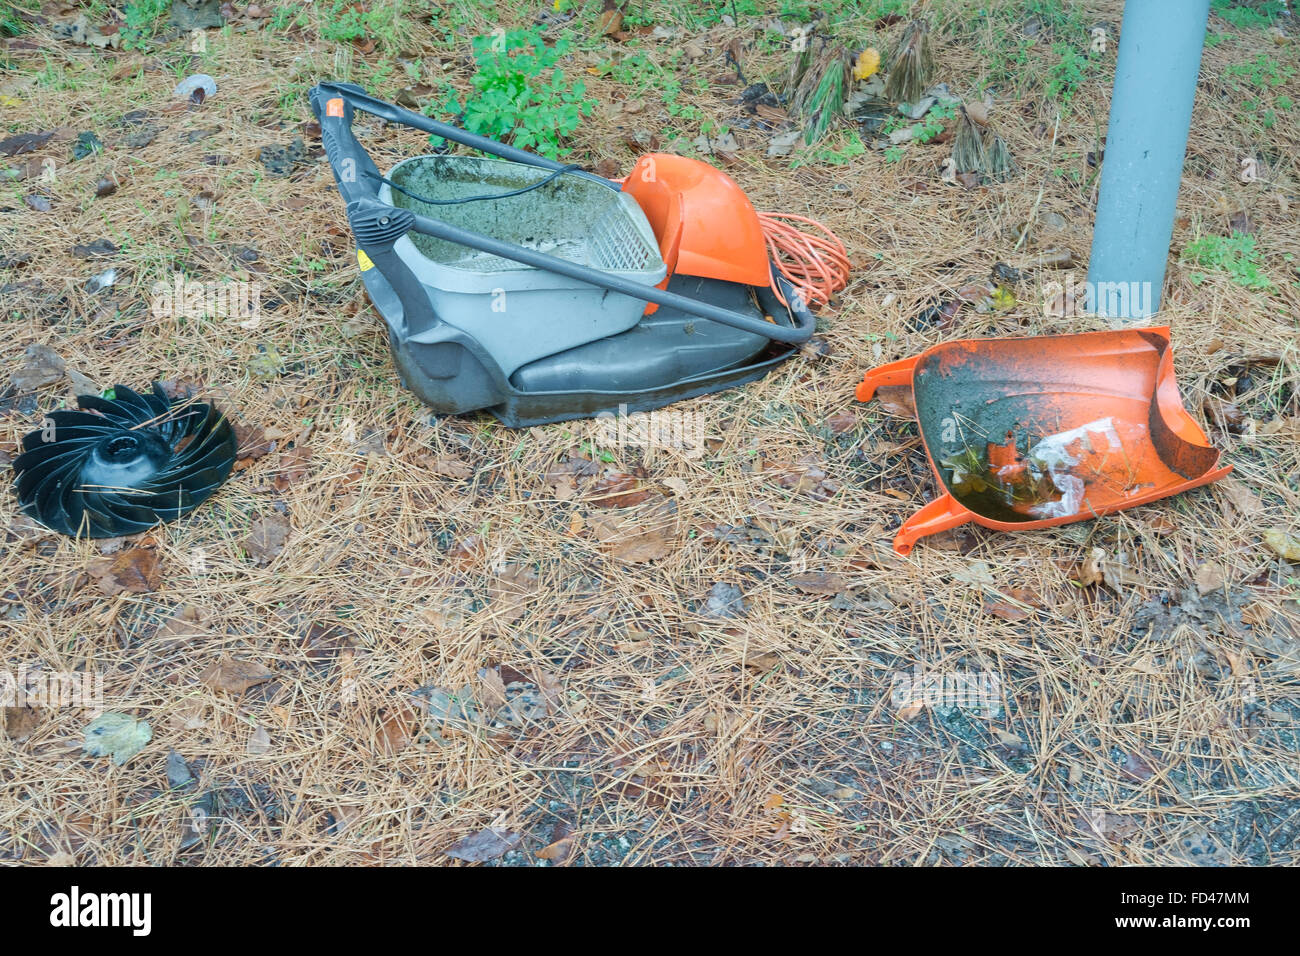 A Flymo lawnmower left in bits by the side of a road Stock Photo